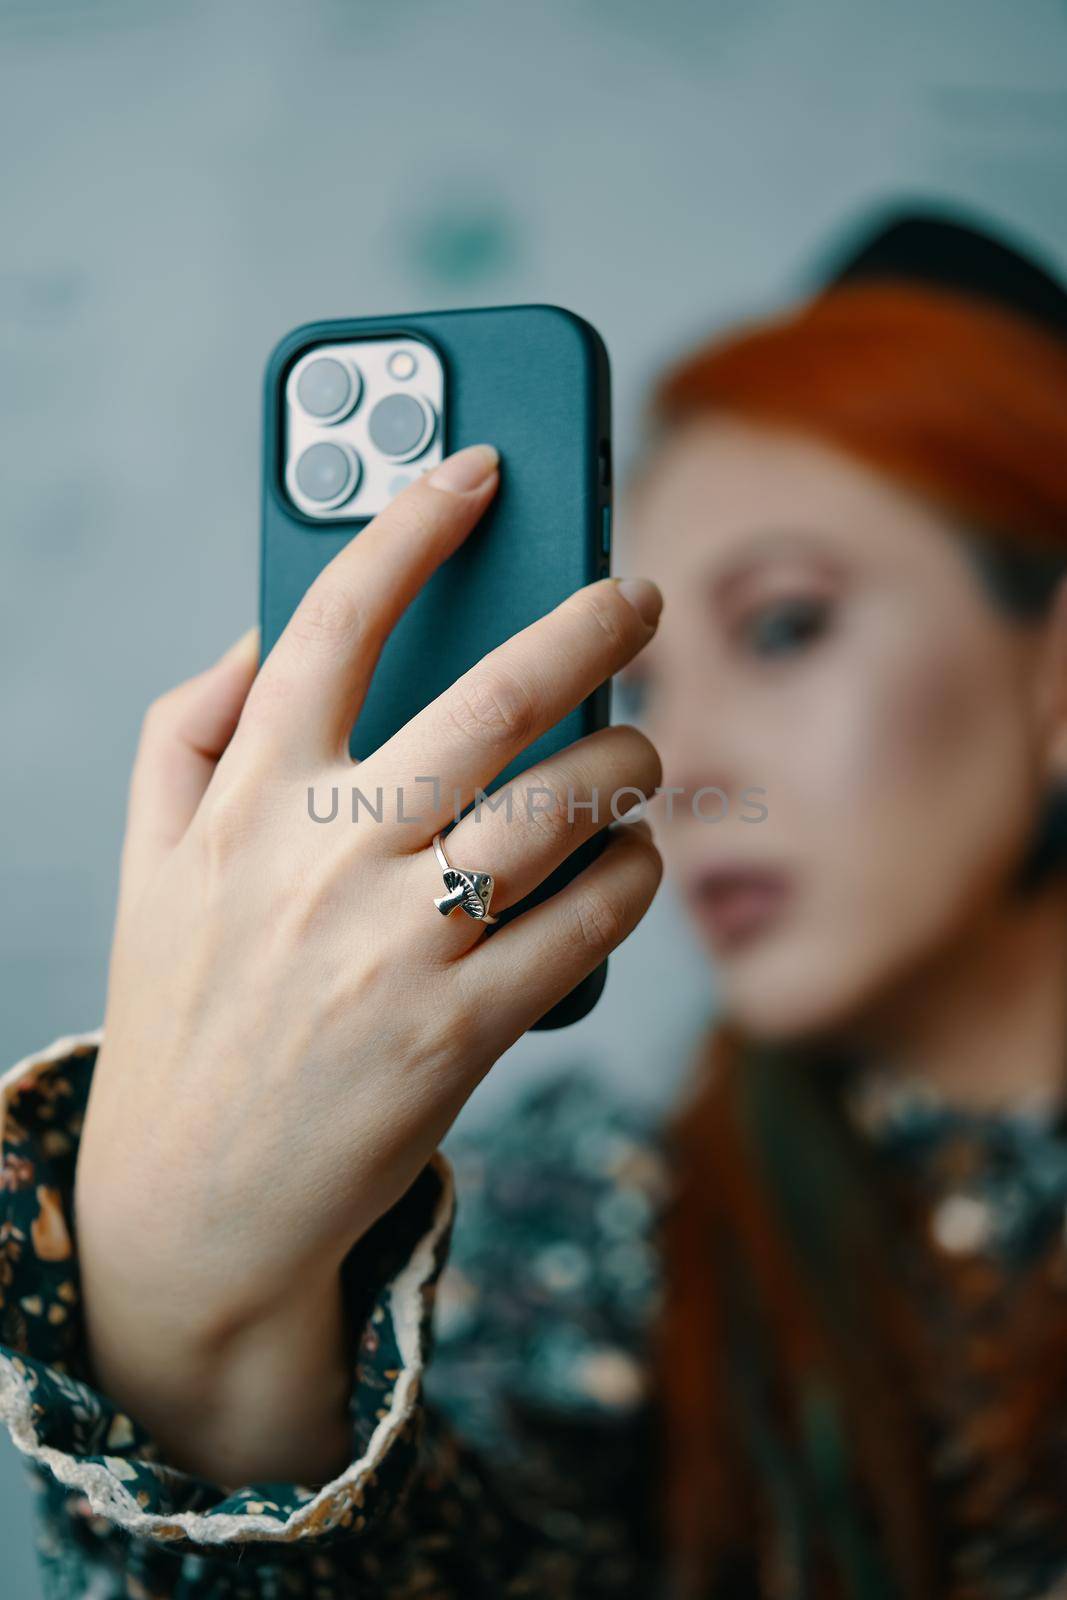 Attractive woman posing takes selfie on iPhone 13 pro. Gadget with triple-lens camera. Focus on foreground. Close-up of female's hand holding smartphone in case. Bishkek, Kyrgyzstan - January 24, 2022